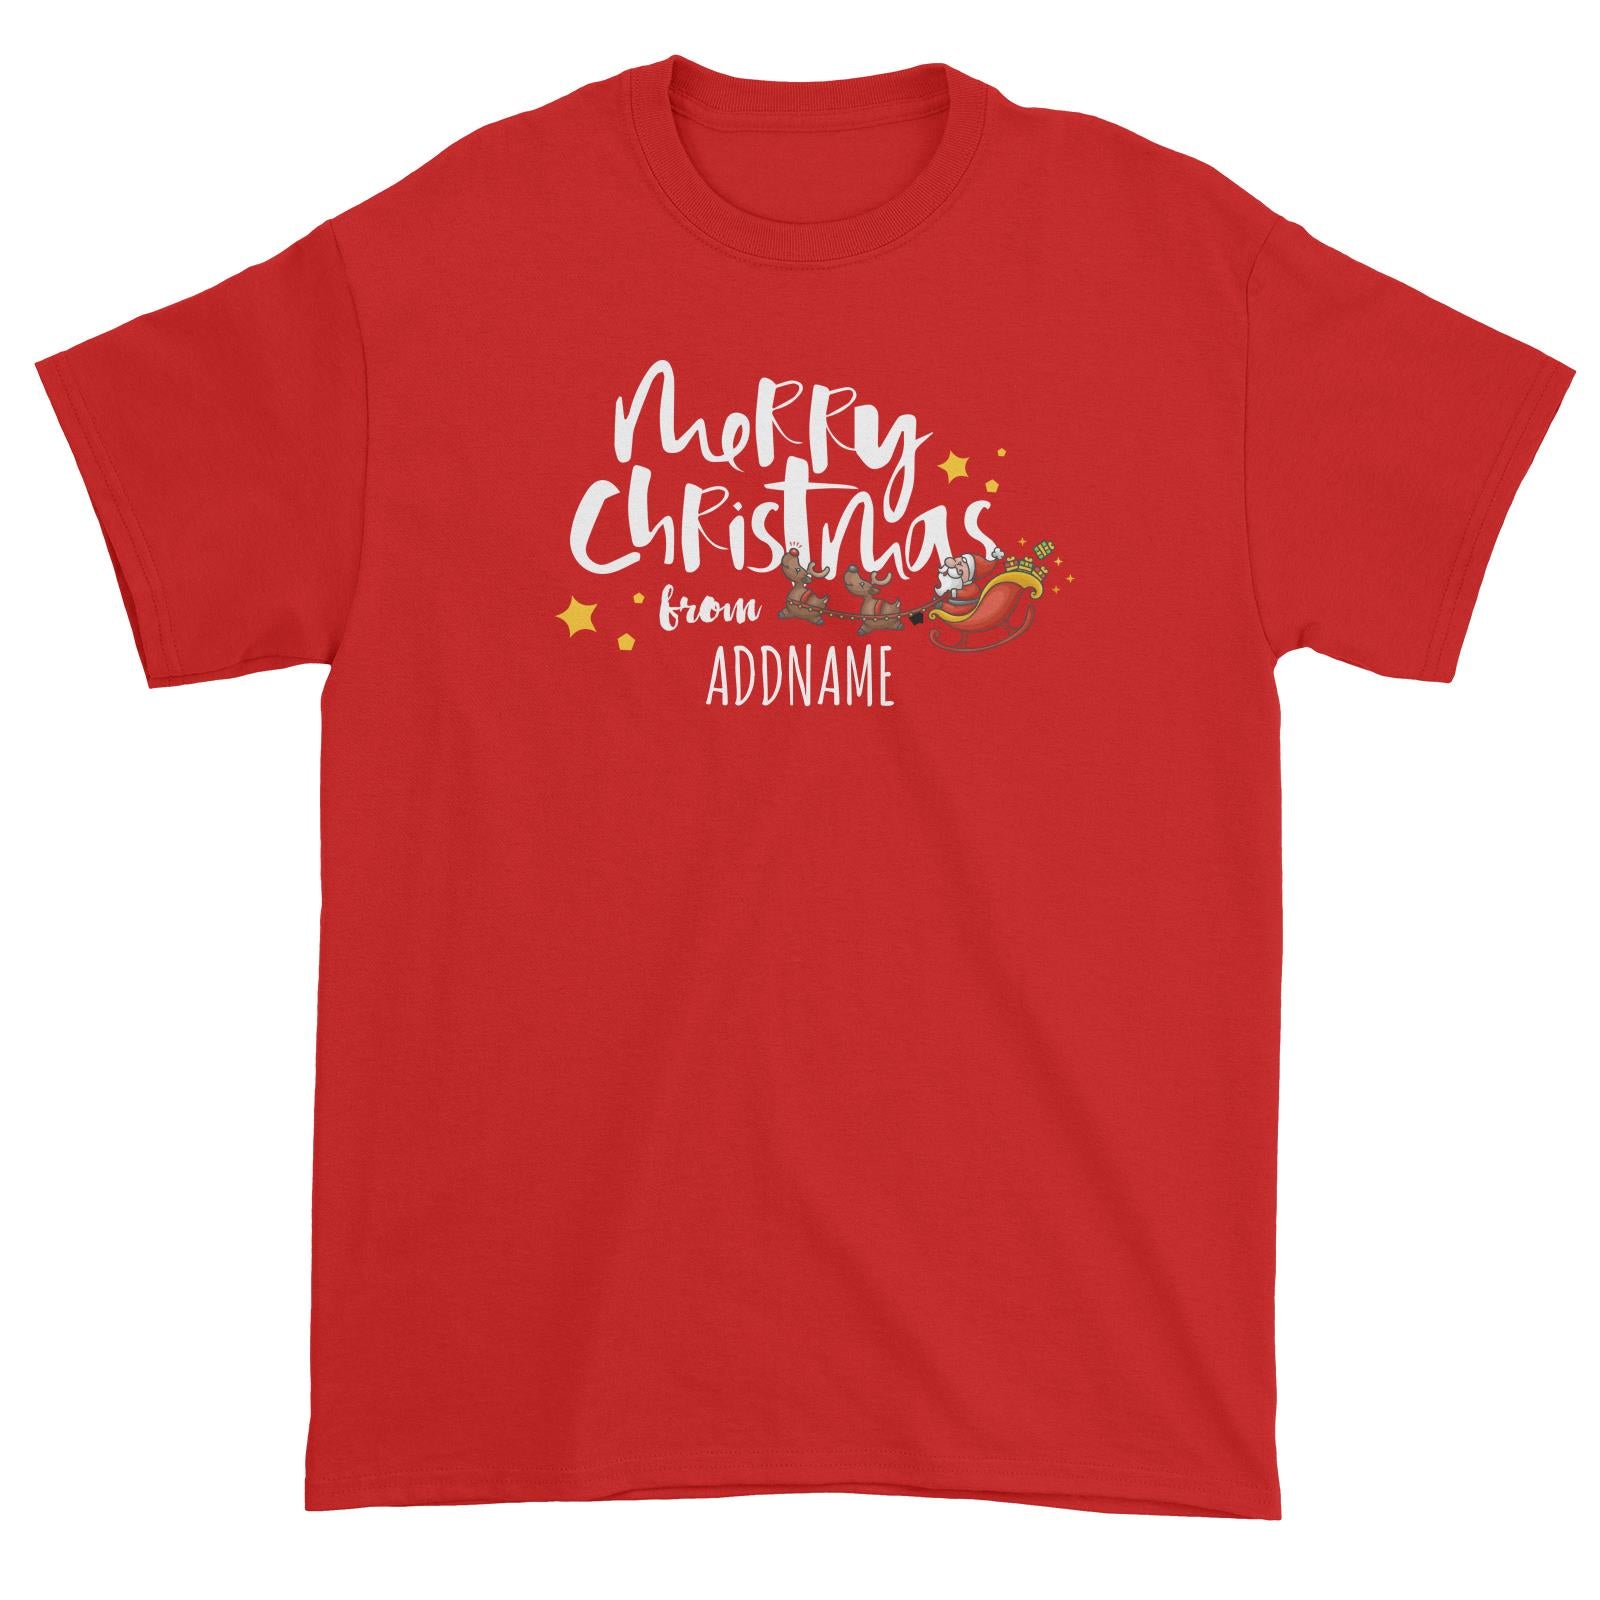 Cute Santa's Sleigh Merry Christmas Greeting Addname Unisex T-Shirt  Personalizable Designs Matching Family